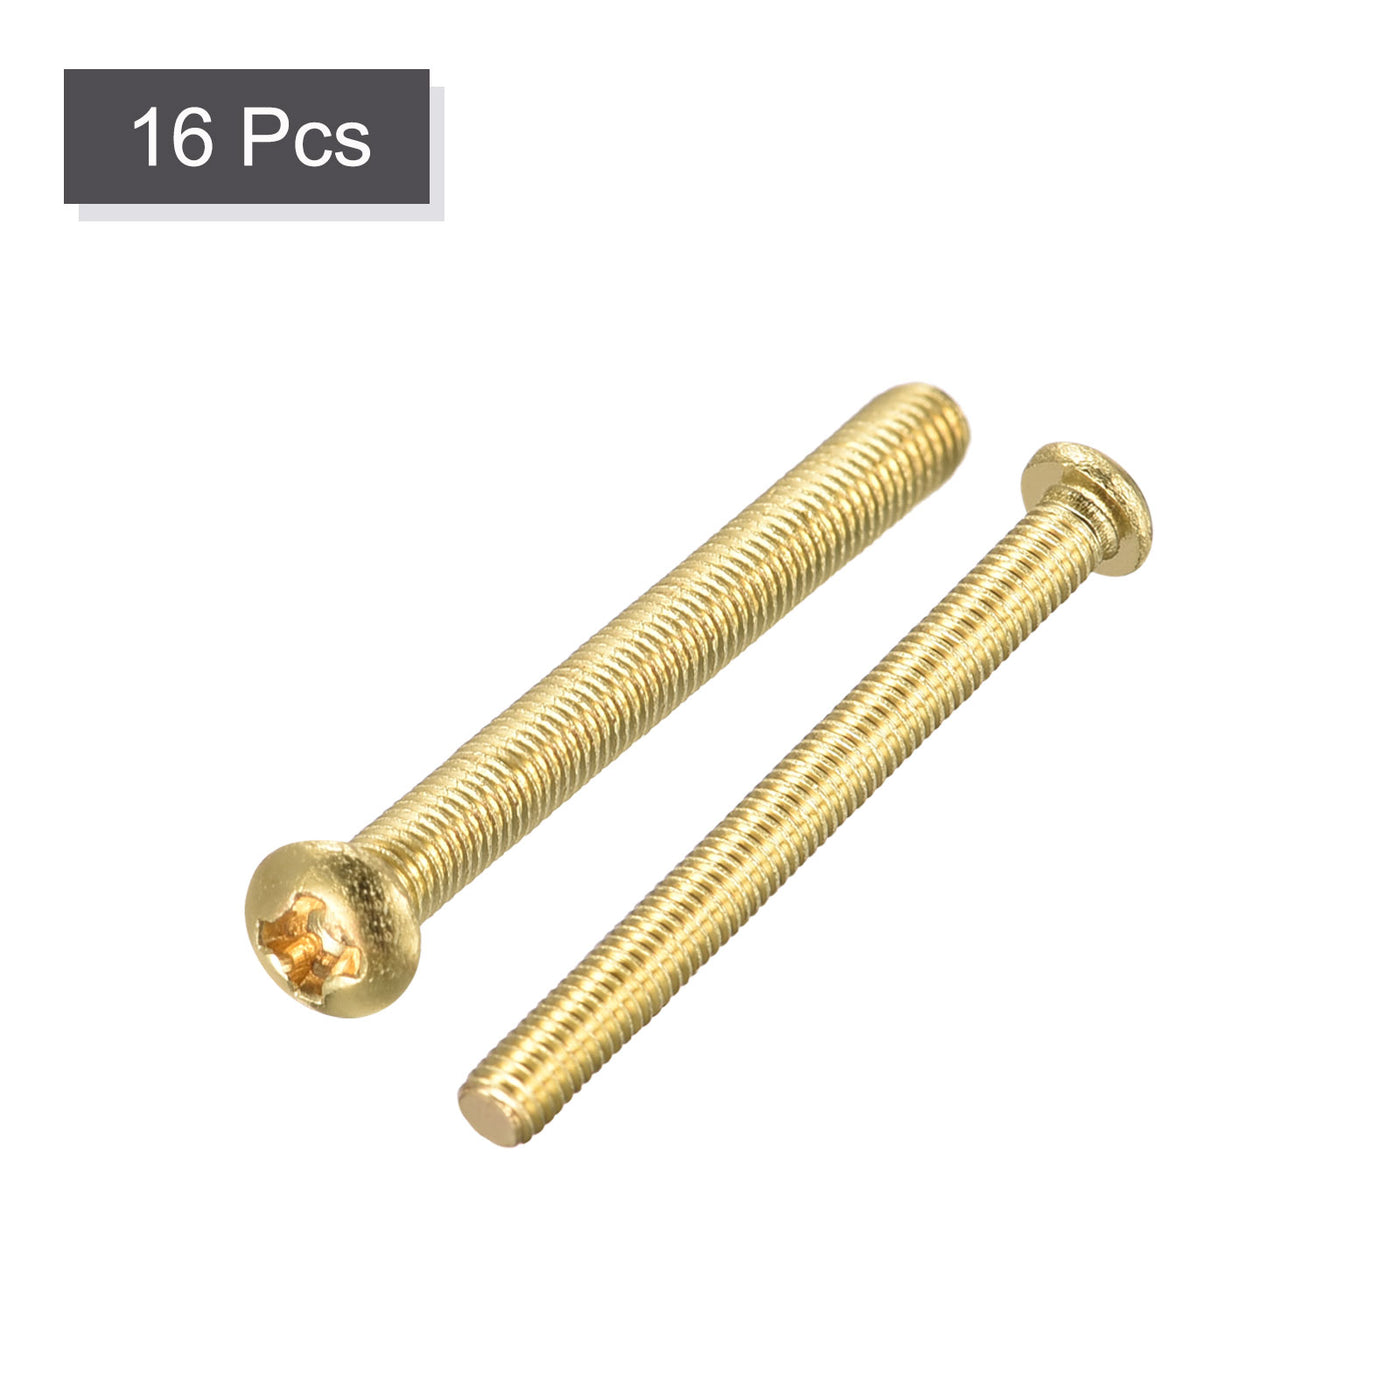 uxcell Uxcell Brass Machine Screws, M3x30mm Phillips Pan Head Fastener Bolts for Furniture, Office Equipment, Electronics 16Pcs